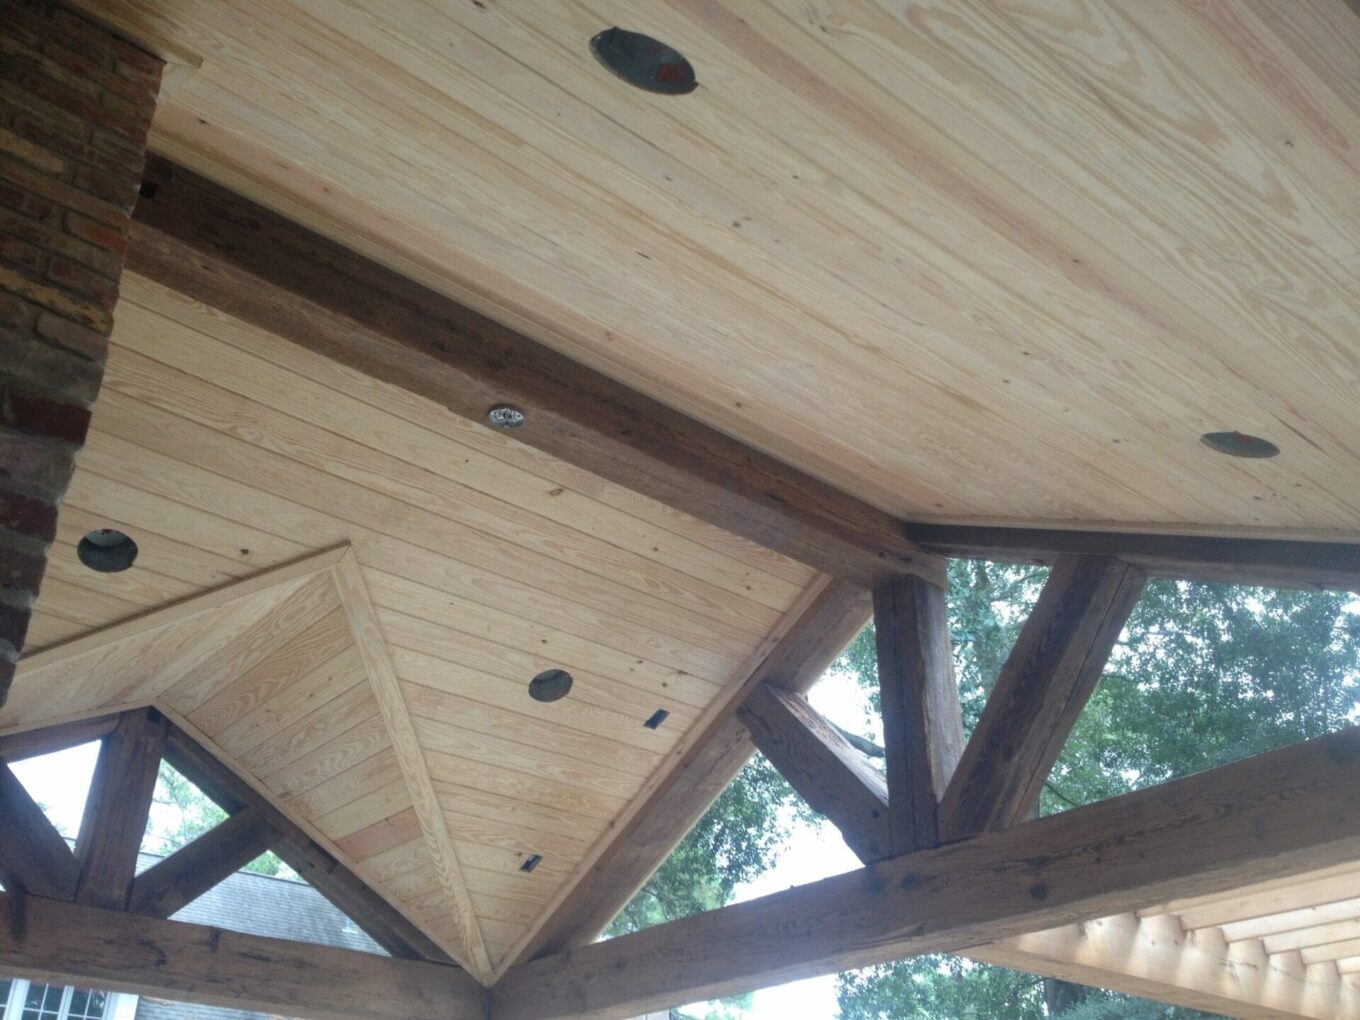 A wooden structure with beams and wood ceiling.